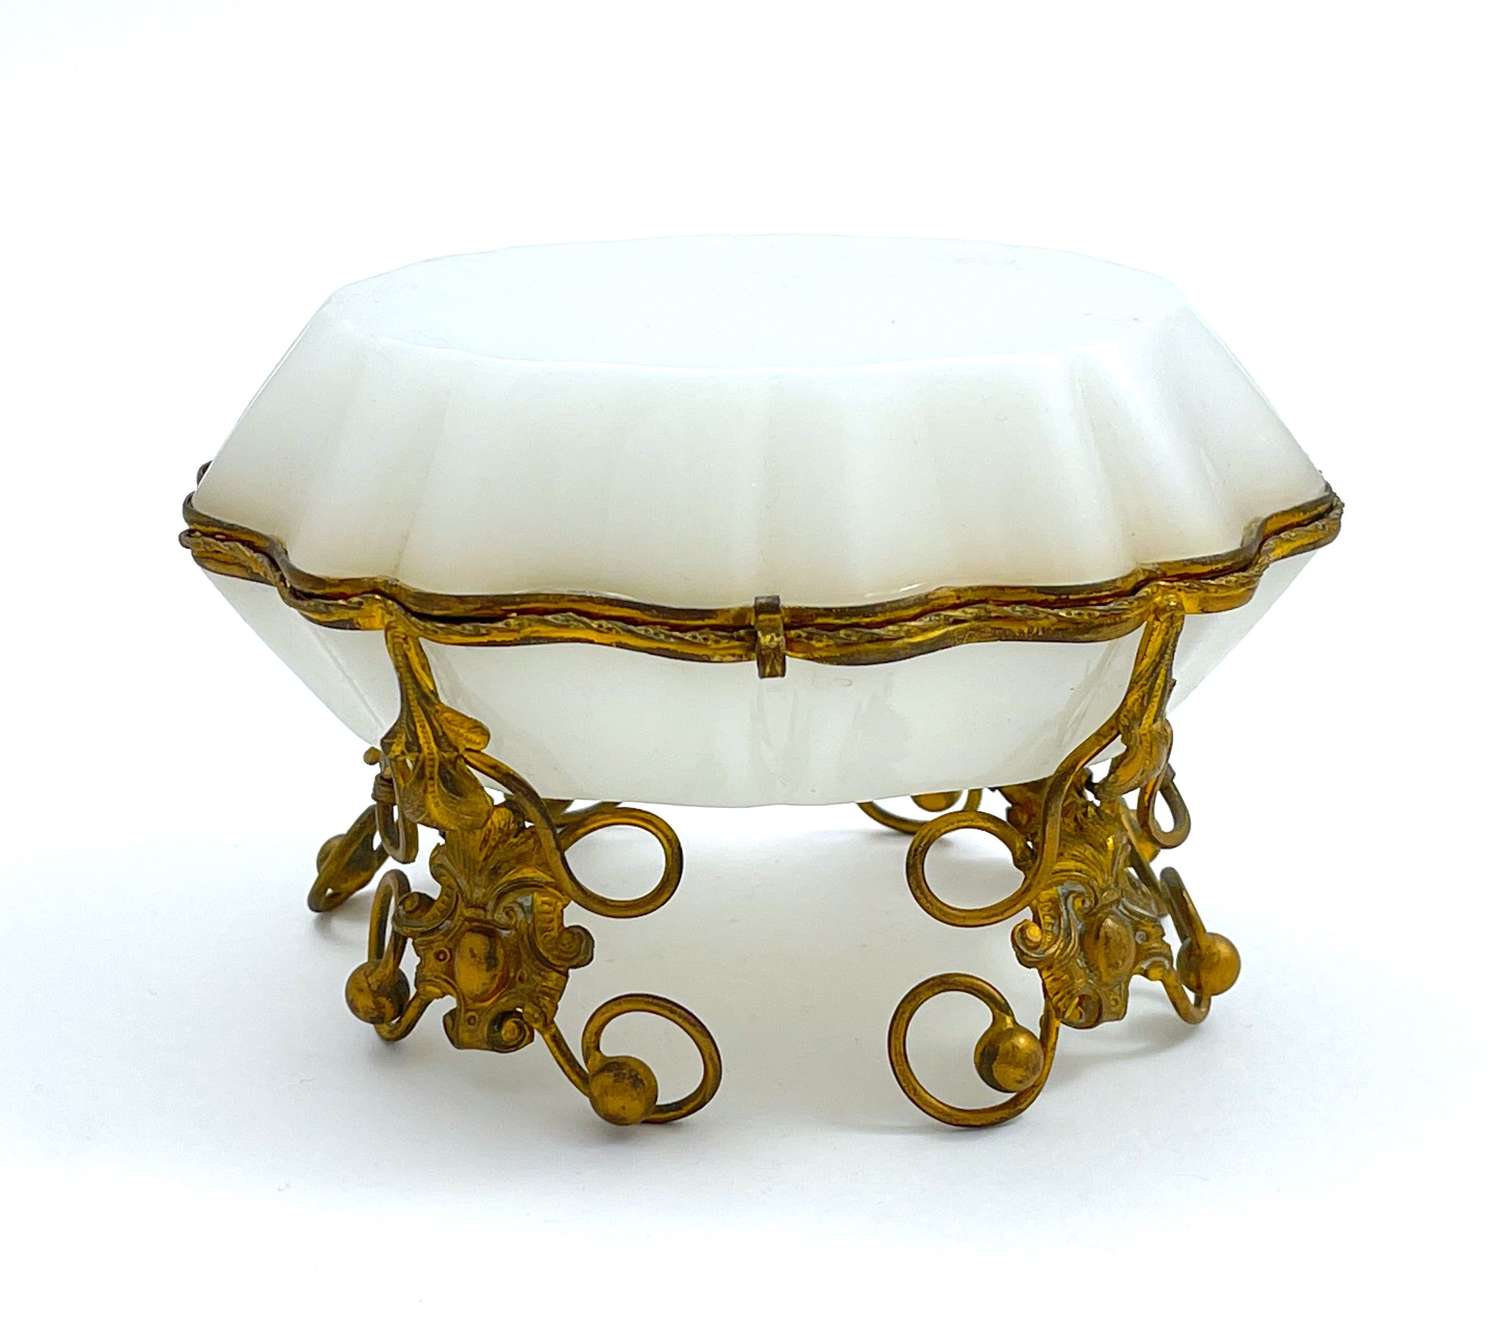 Antique French White Opaline Glass Scallop Shaped Casket Box